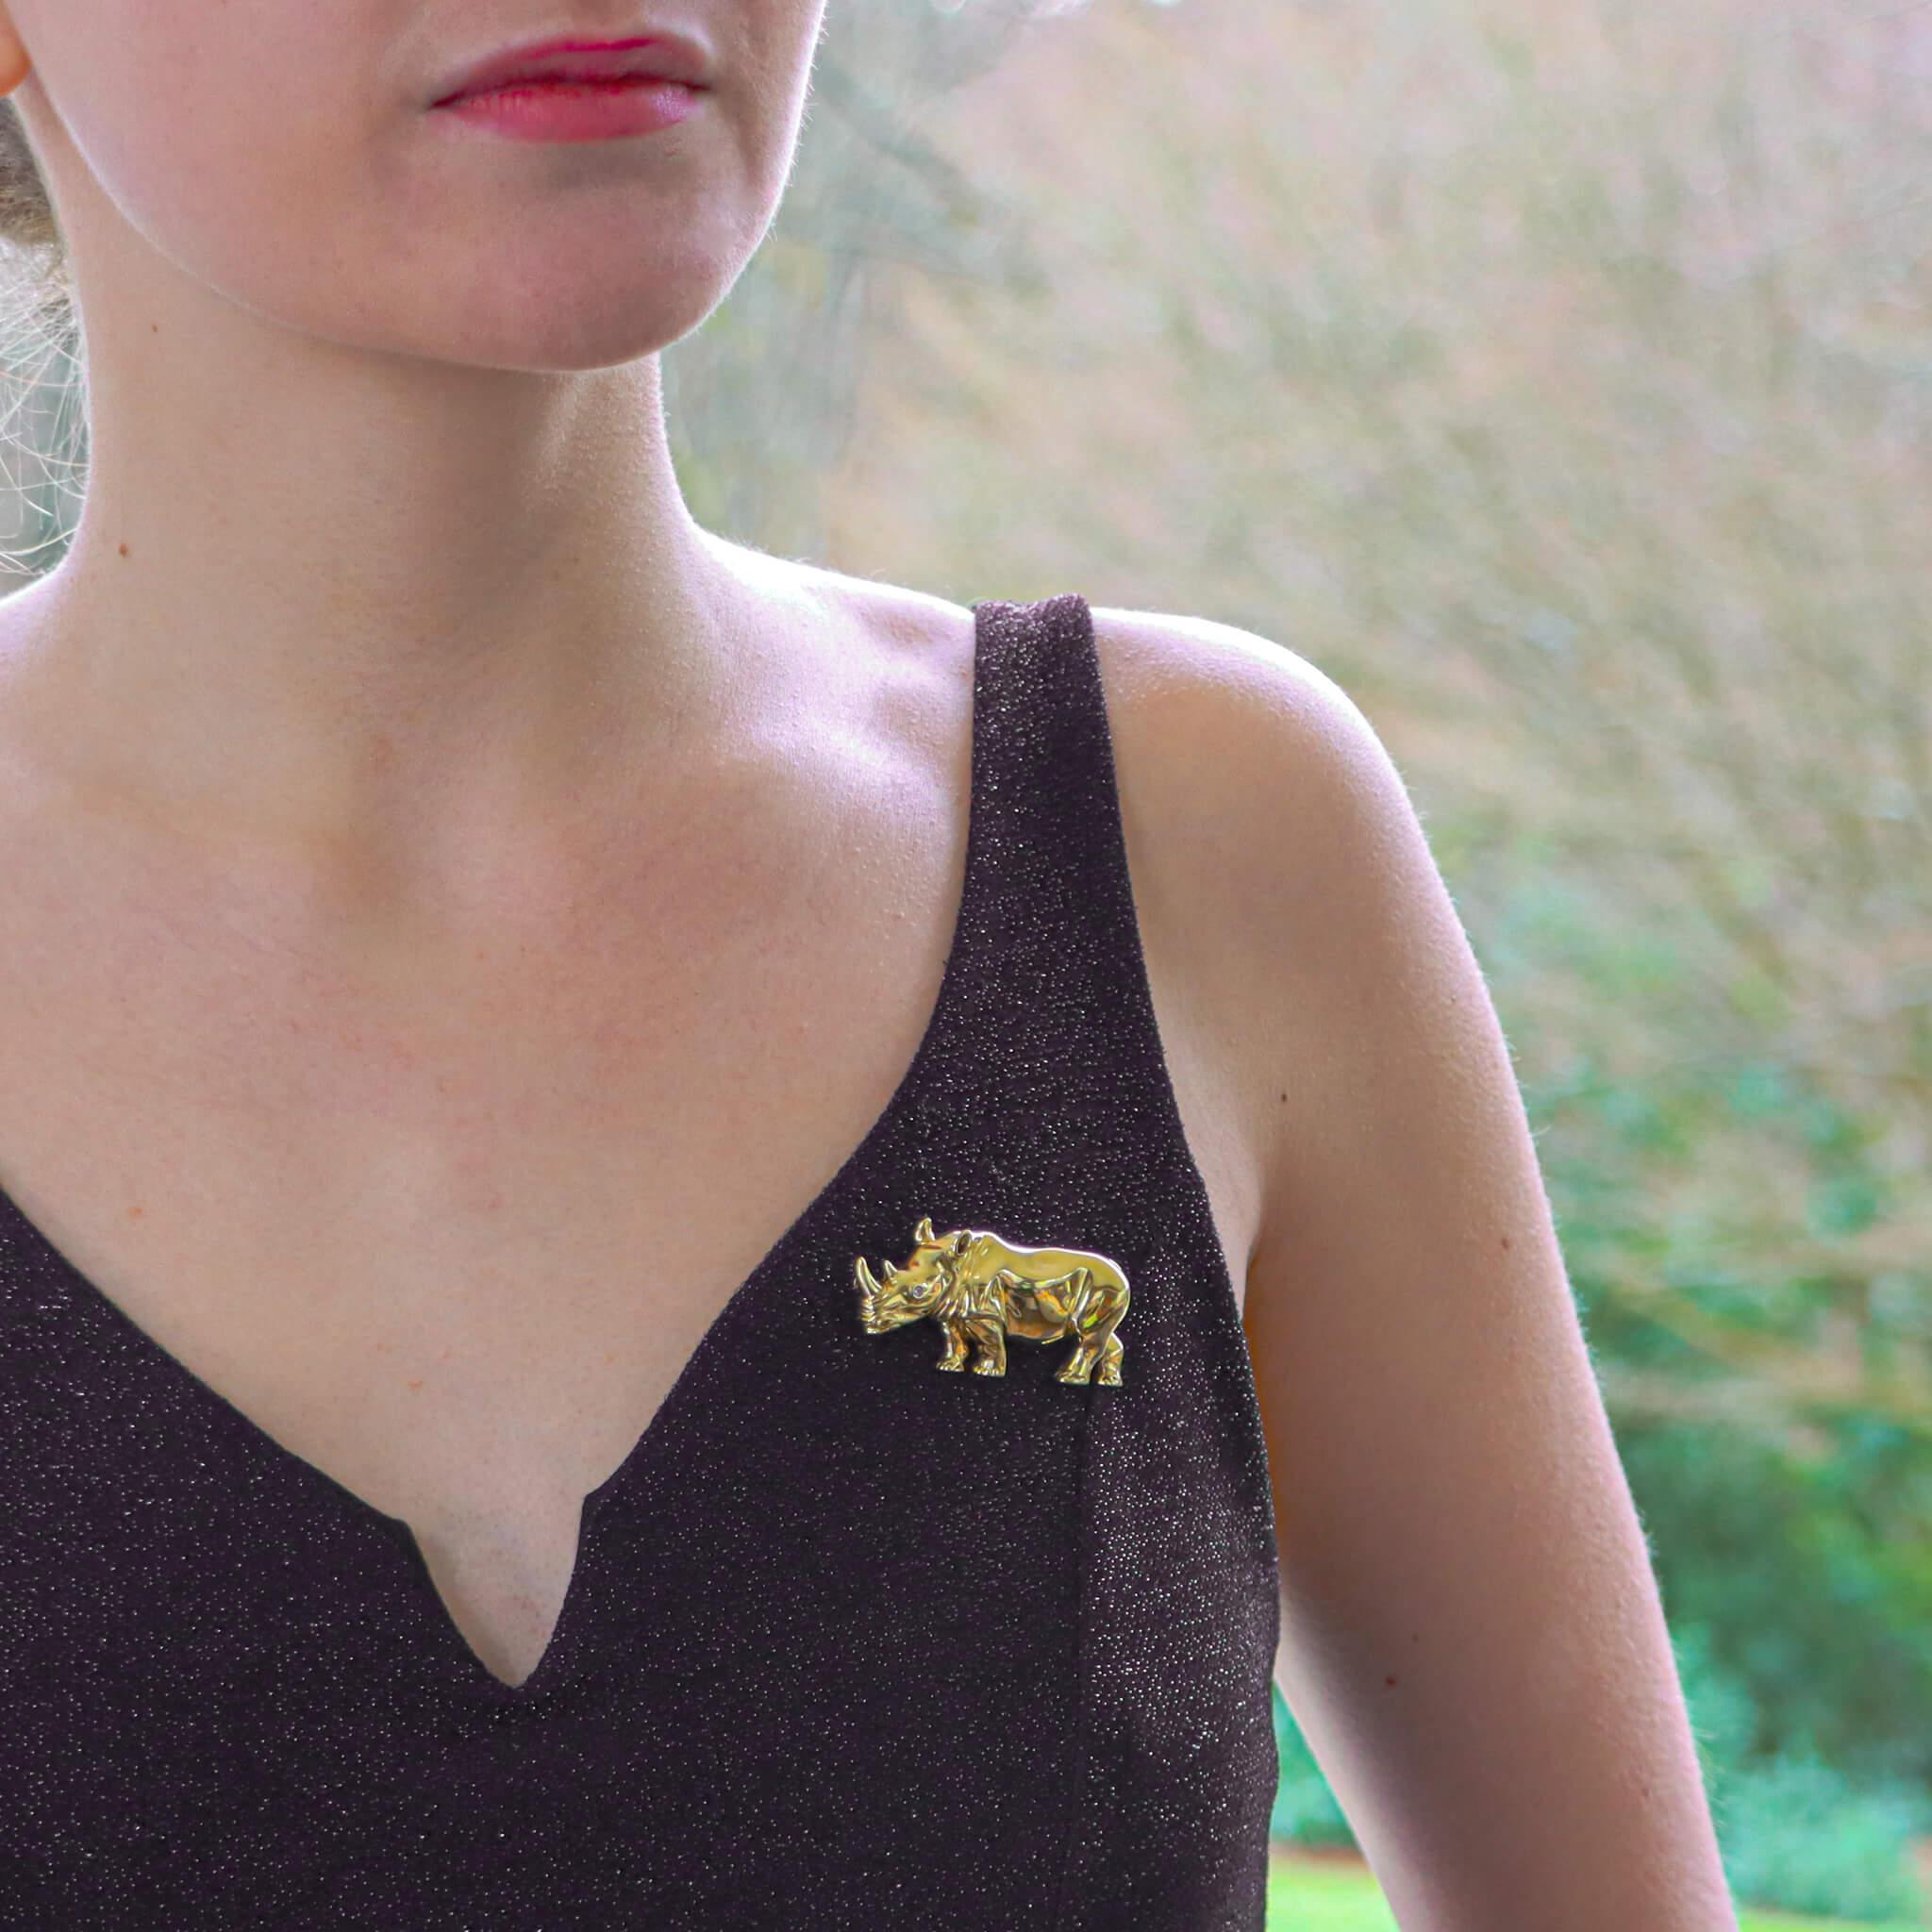  A beautiful vintage Rhino brooch set in 18k yellow gold.

The brooch depicts a standing side view of rhino which is set with a singular round brilliant cut diamond eye. The rhino's skin has been beautifully hand crafted in 18k yellow gold to give